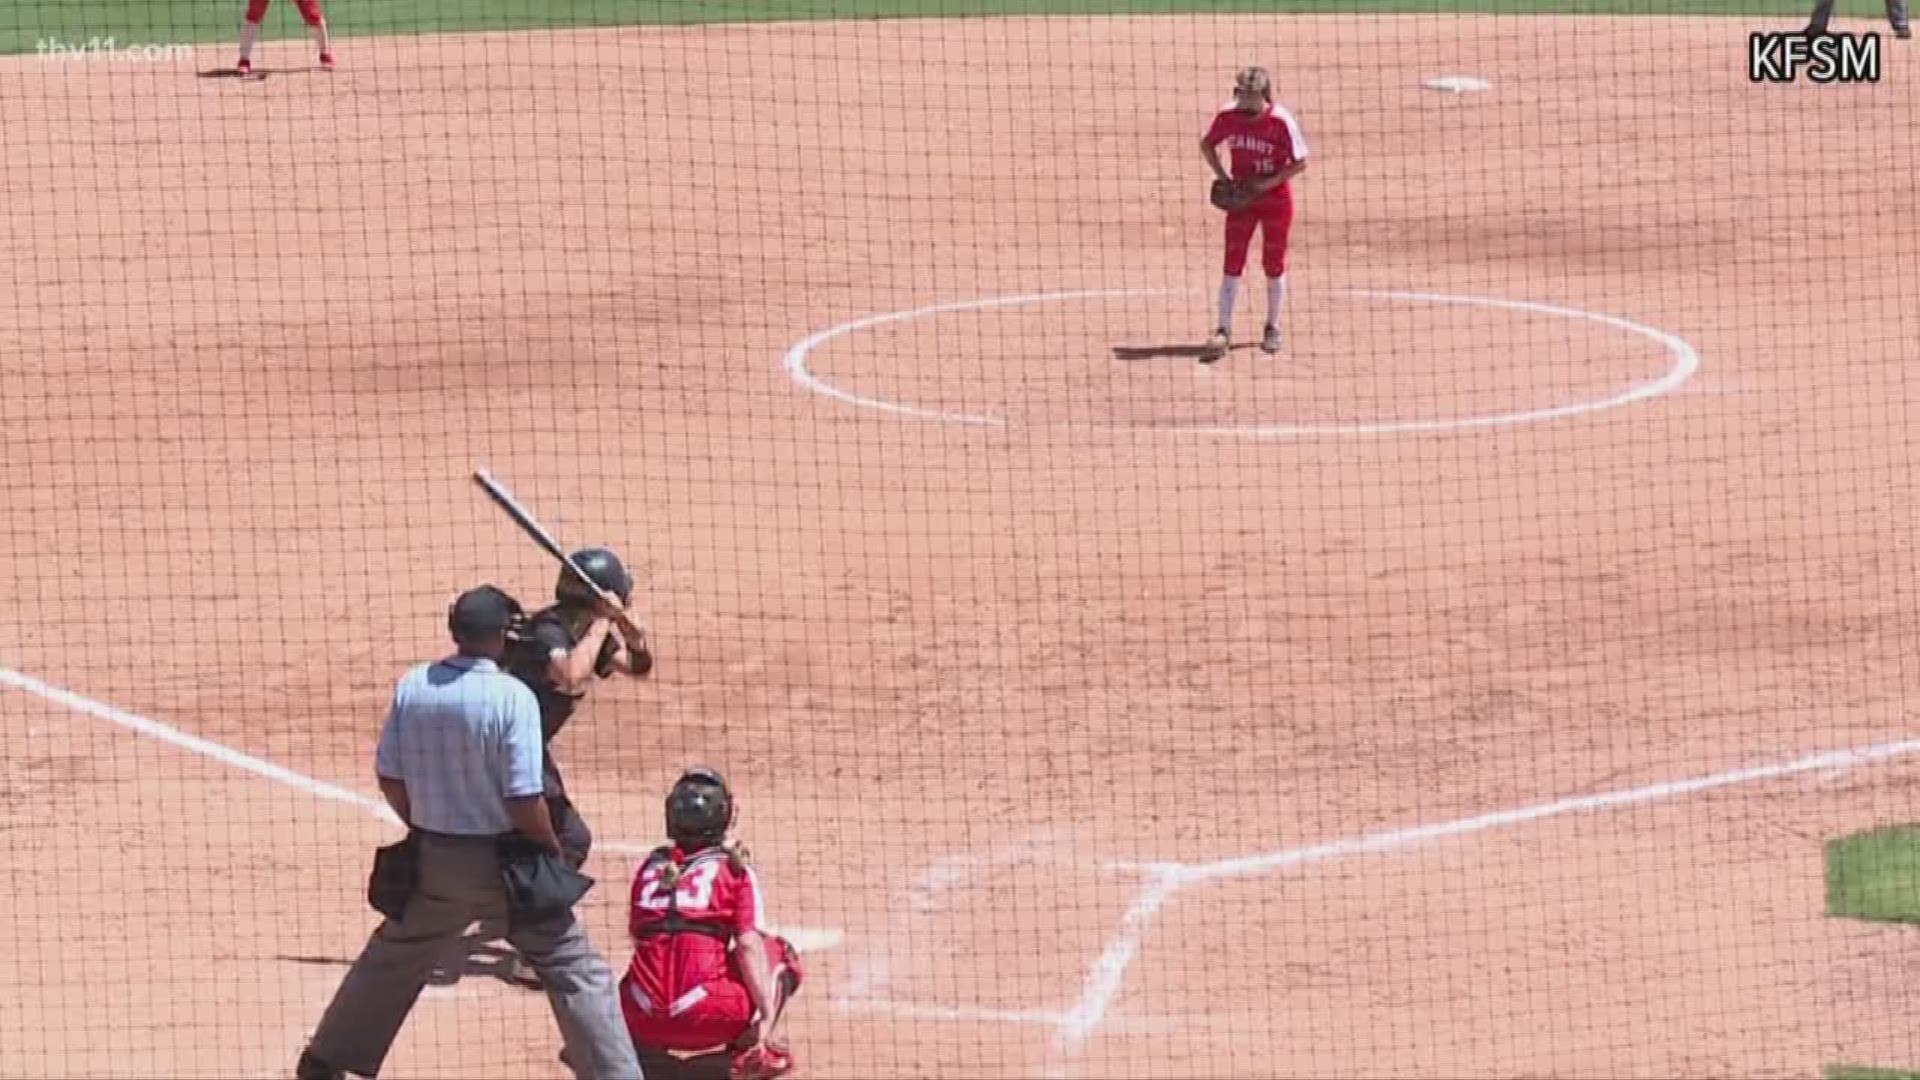 The Lady Panthers broke through in a 3-3 game to beat Bentonville 5-3 in the 6A softball championship